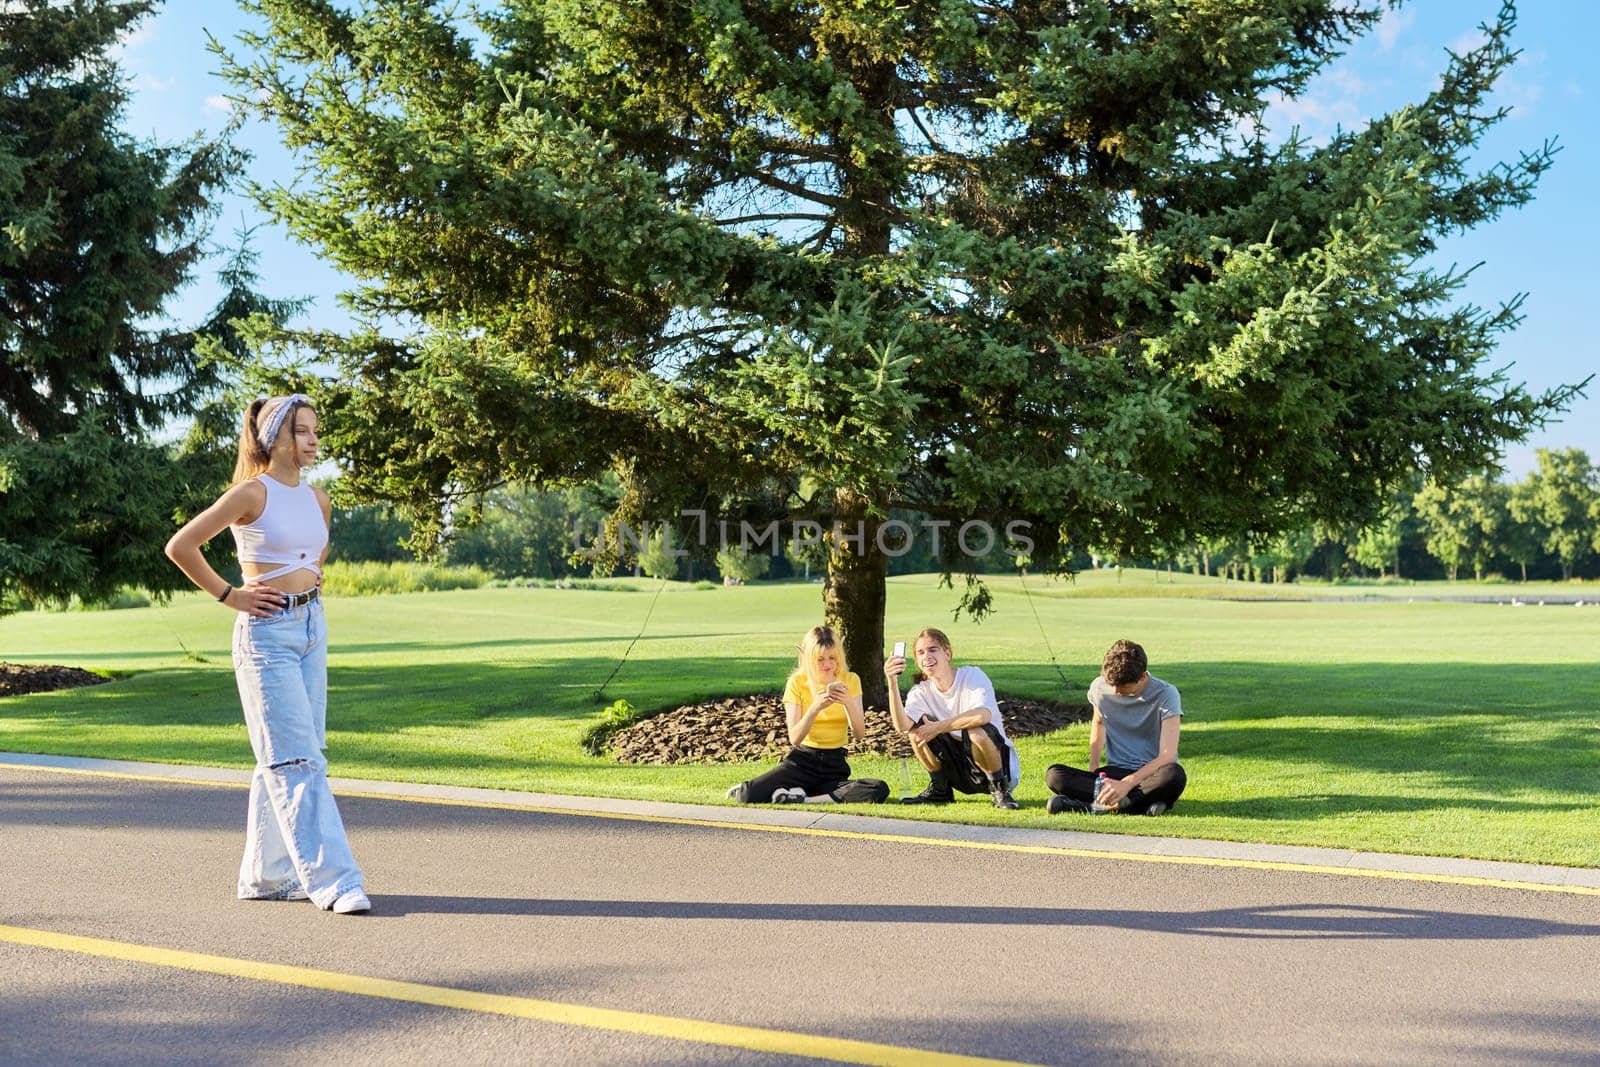 Group of hipsters teenagers having fun in park on road, teenage girl dancing street dance, friends filming video on smartphone. Vacation, leisure, friendship, lifestyle, teenagers concept